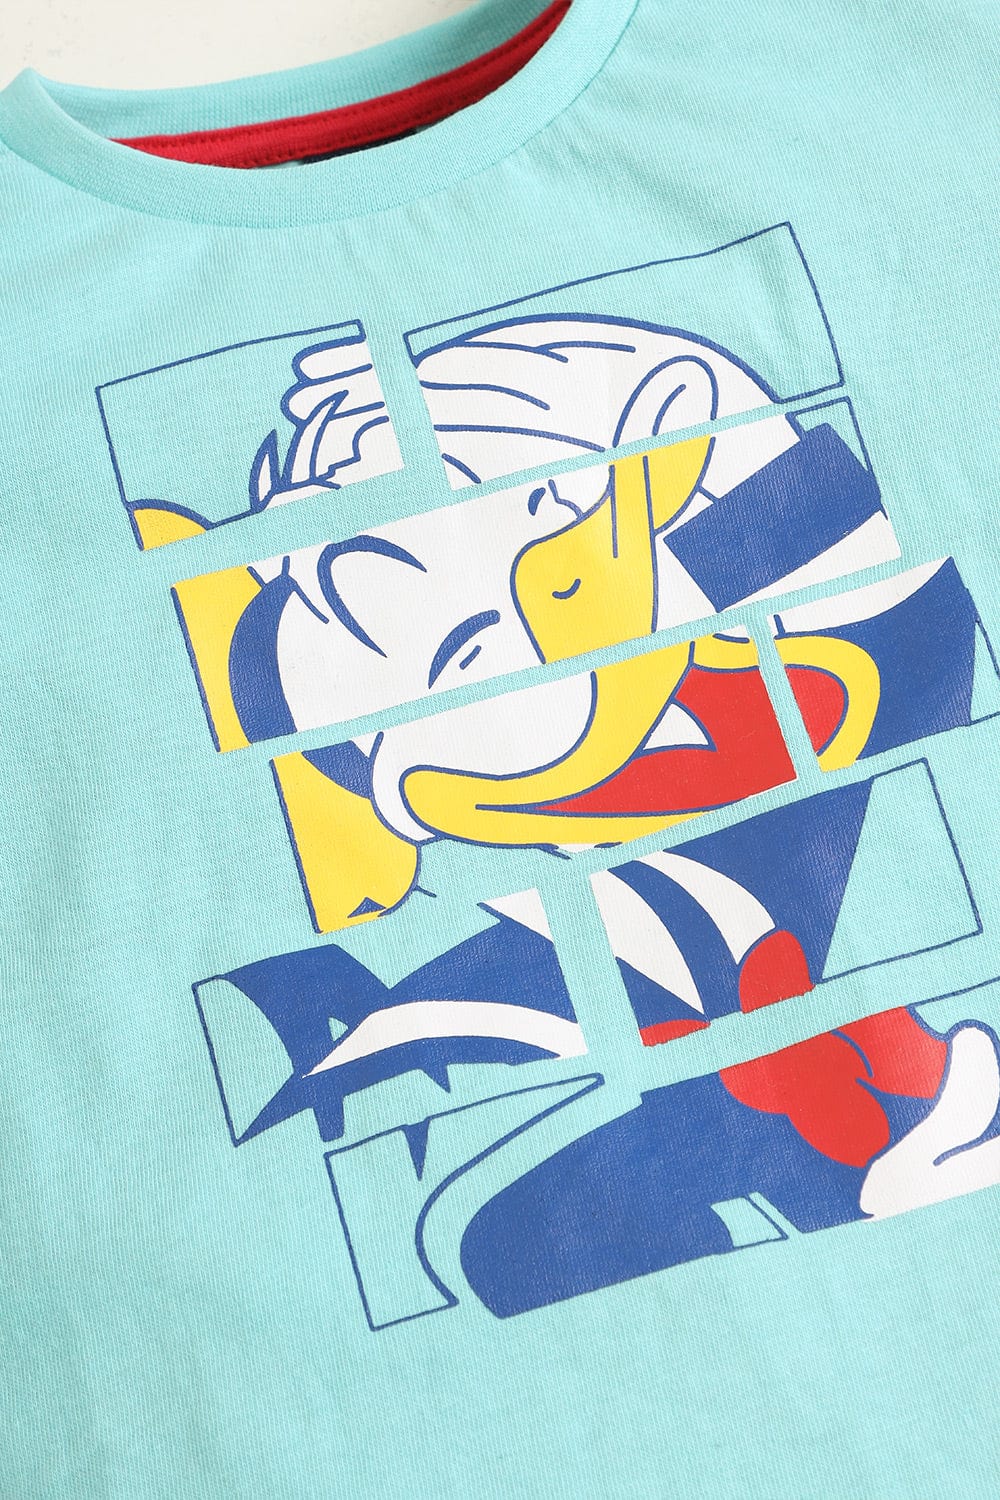 Hope Not Out by Shahid Afridi Girls Knit T-Shirt Cute Donald Duck Graphic Cyan Sleeveless T-Shirt for Girls